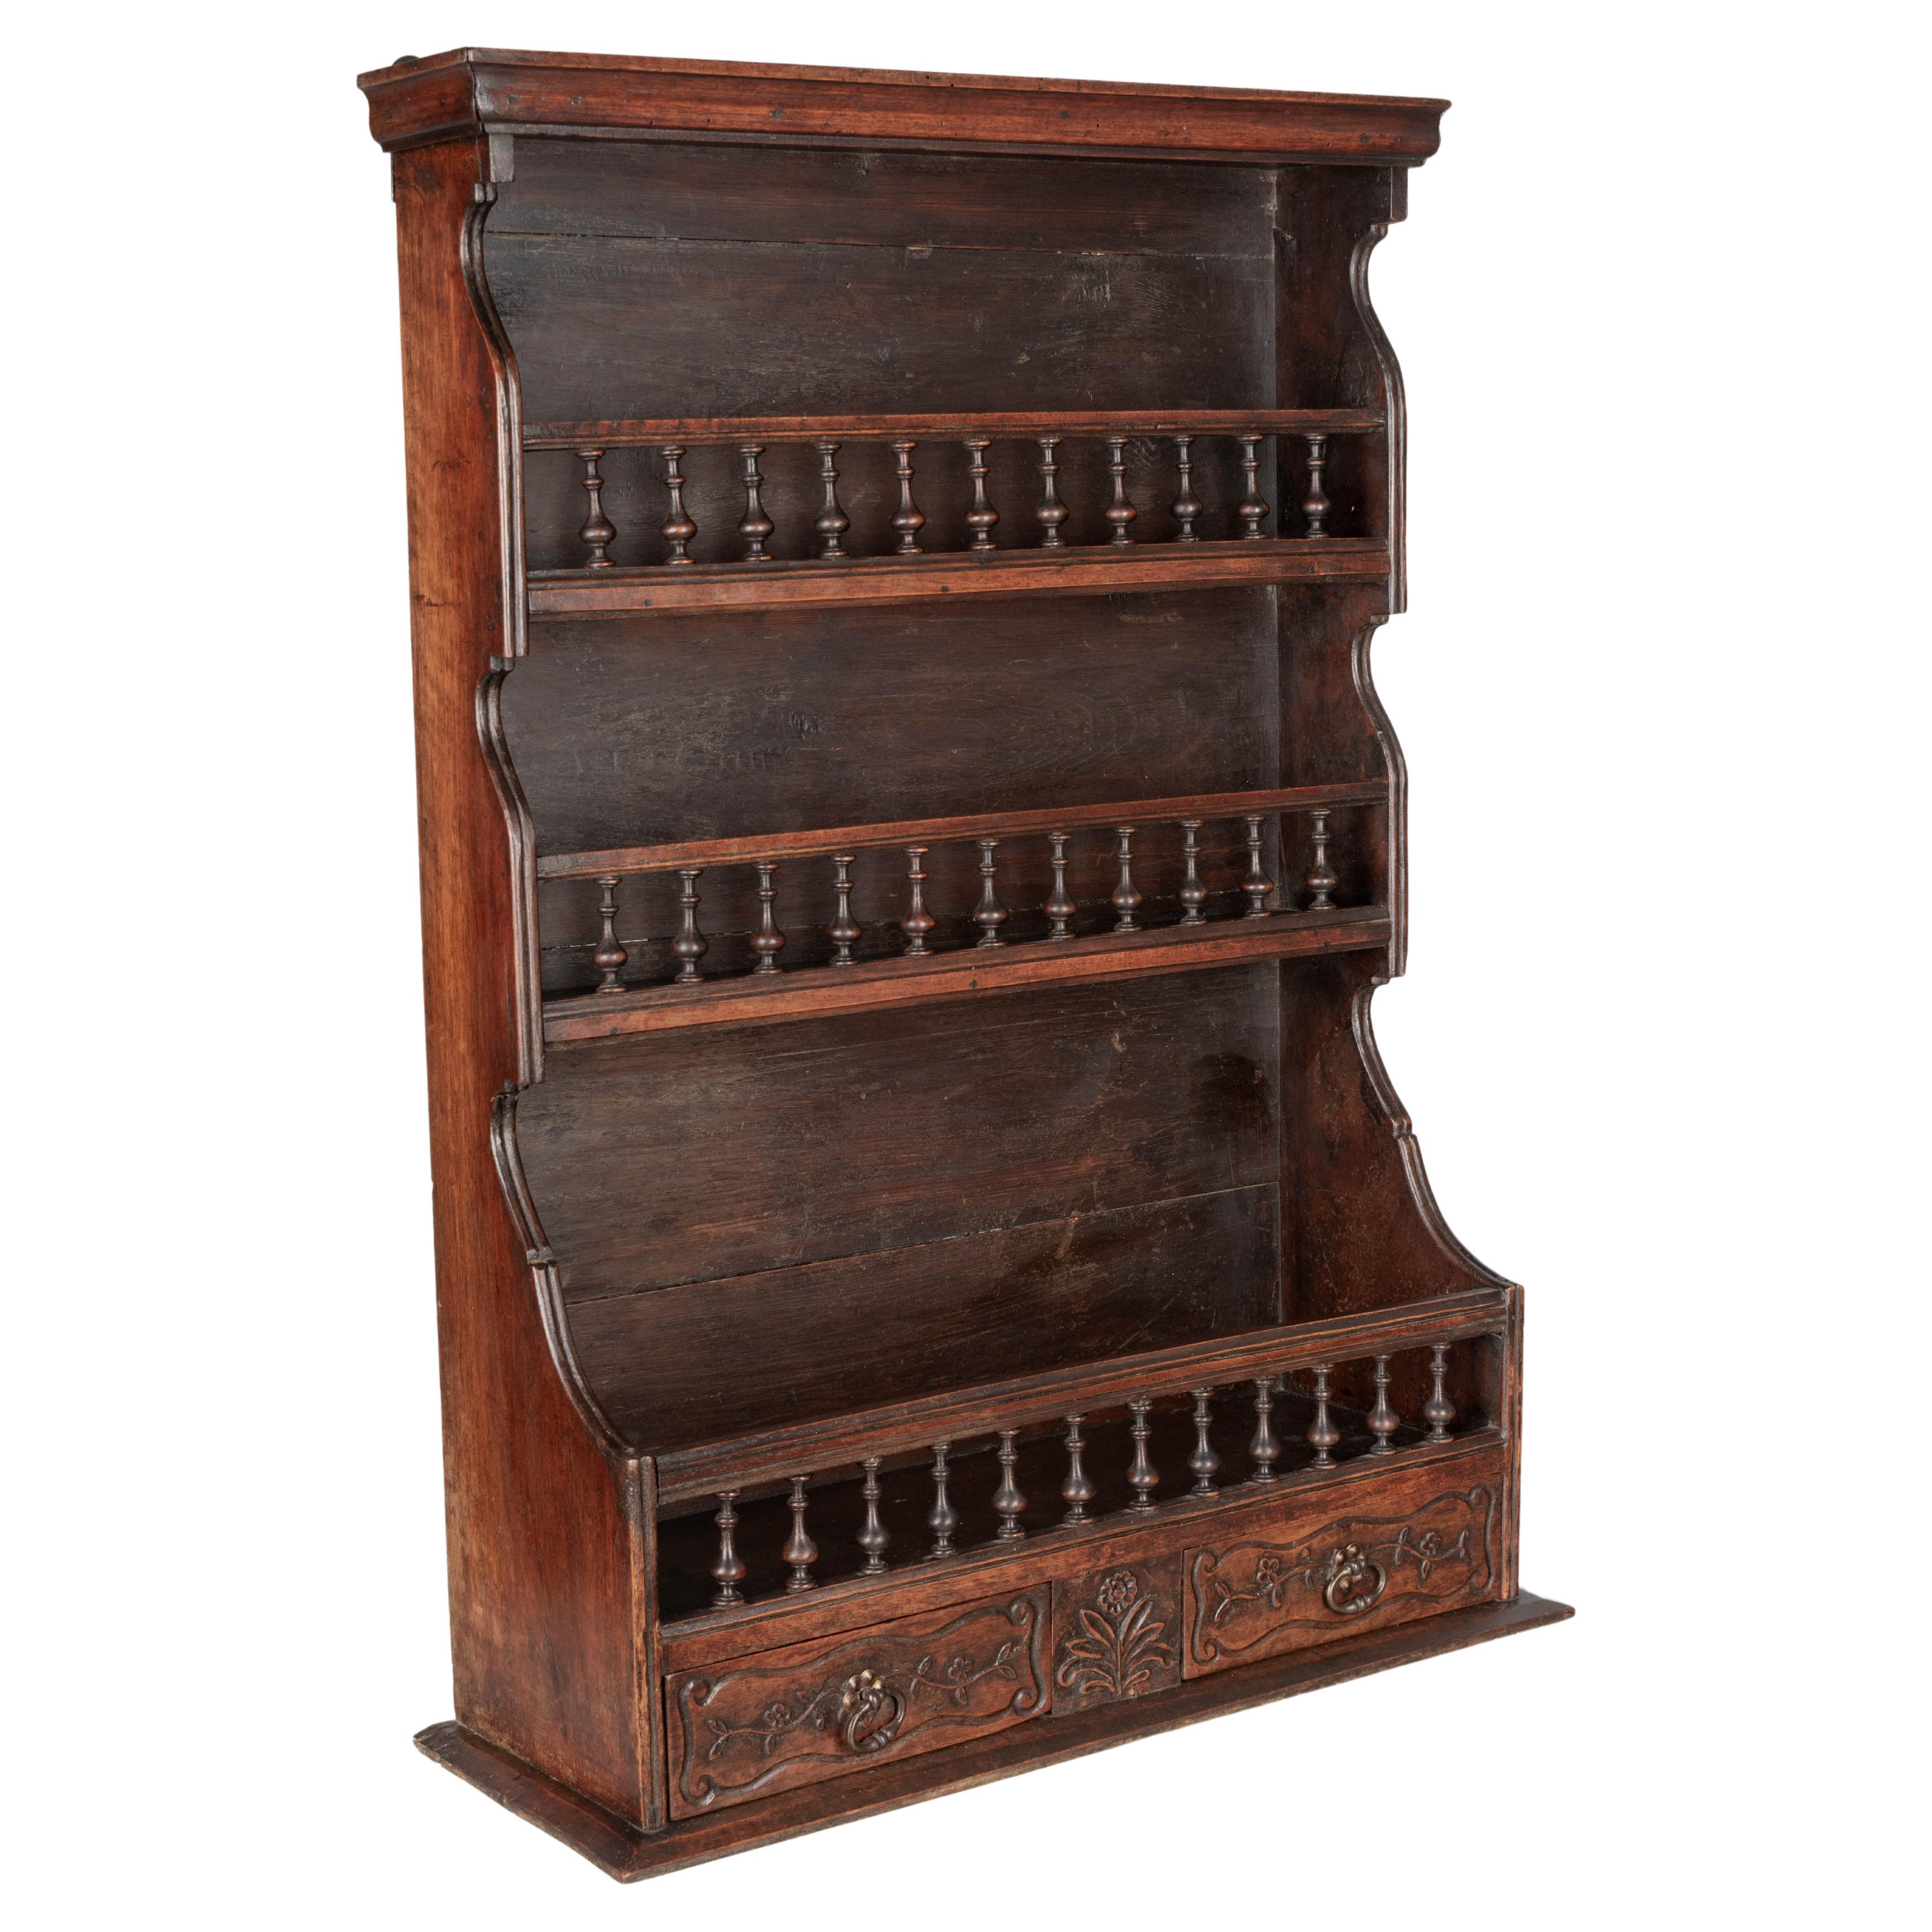 19th Century French Provençal Wall Shelf or Plate Rack